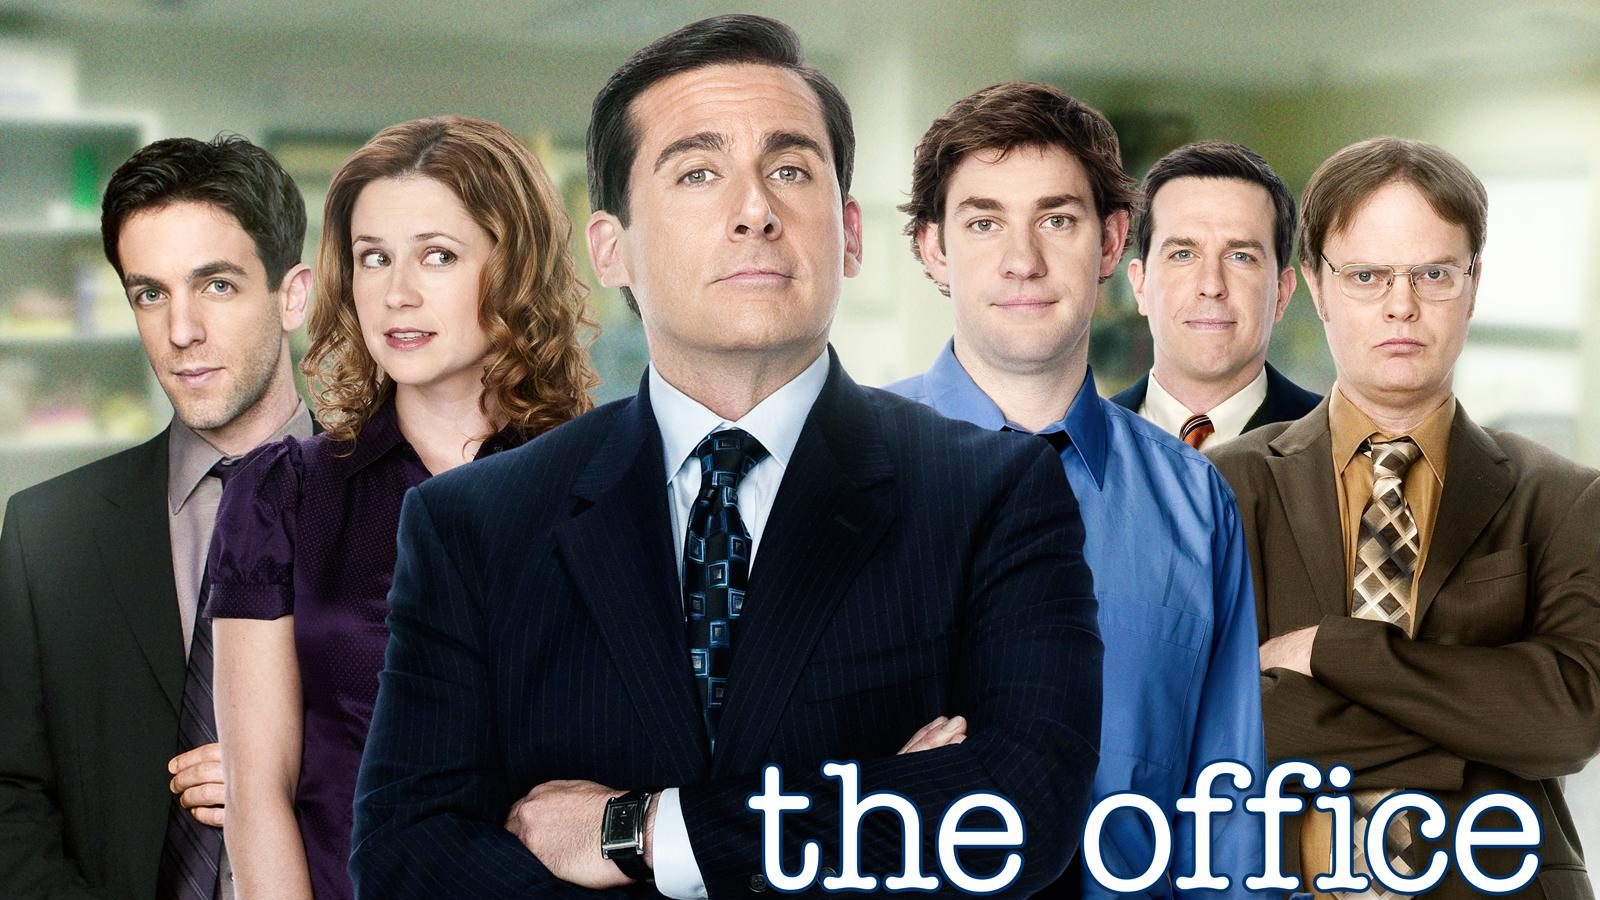 The Office' Producers' New Work-From-Home Show - Simplemost